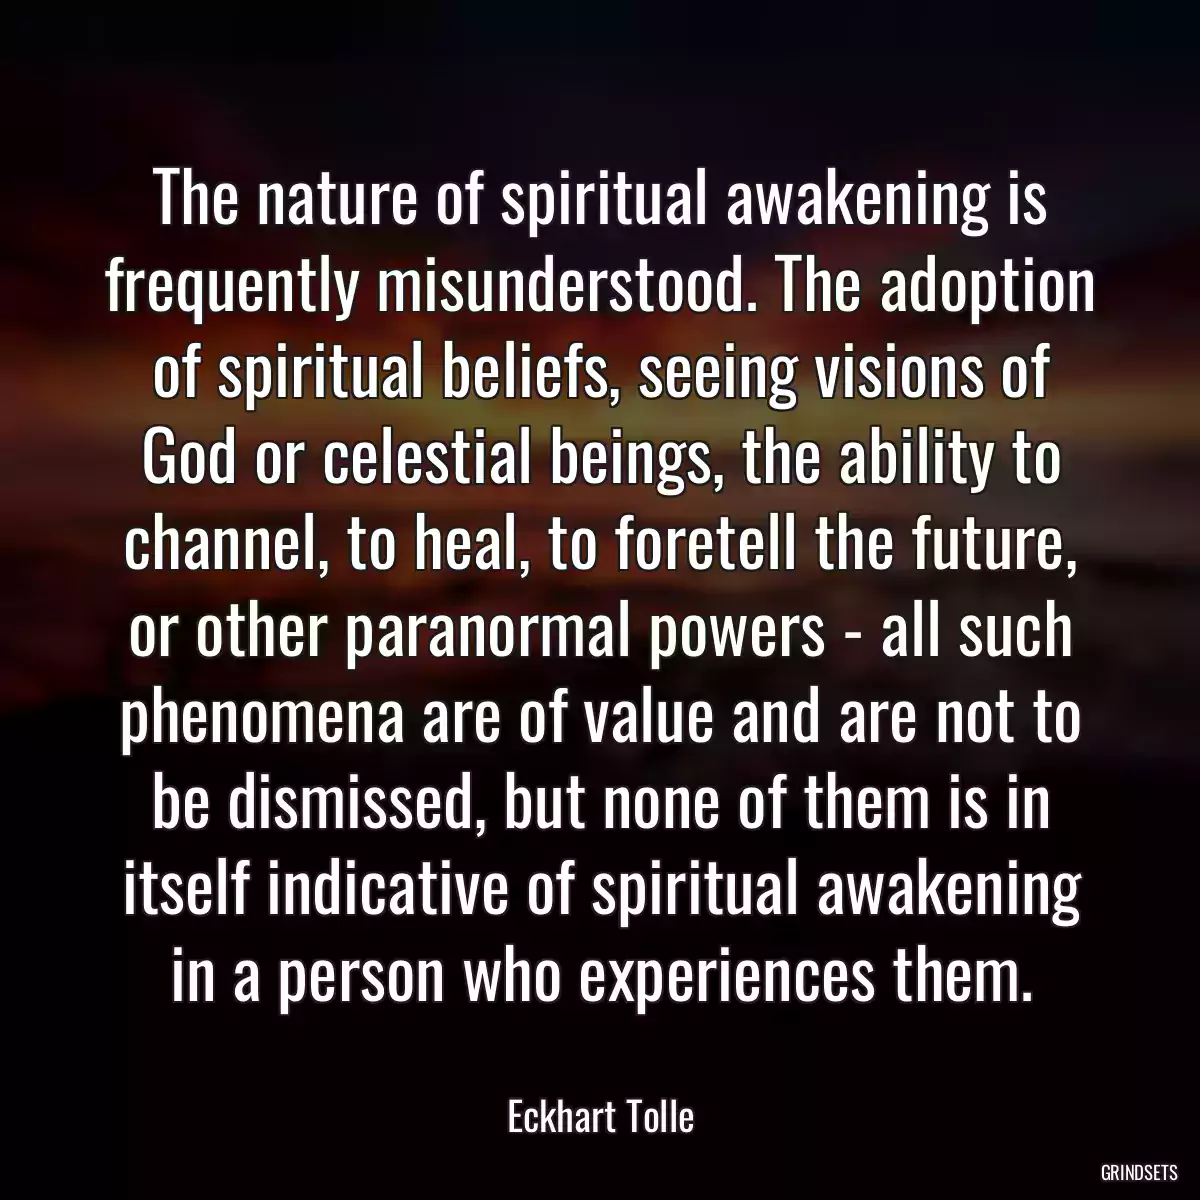 The nature of spiritual awakening is frequently misunderstood. The adoption of spiritual beliefs, seeing visions of God or celestial beings, the ability to channel, to heal, to foretell the future, or other paranormal powers - all such phenomena are of value and are not to be dismissed, but none of them is in itself indicative of spiritual awakening in a person who experiences them.